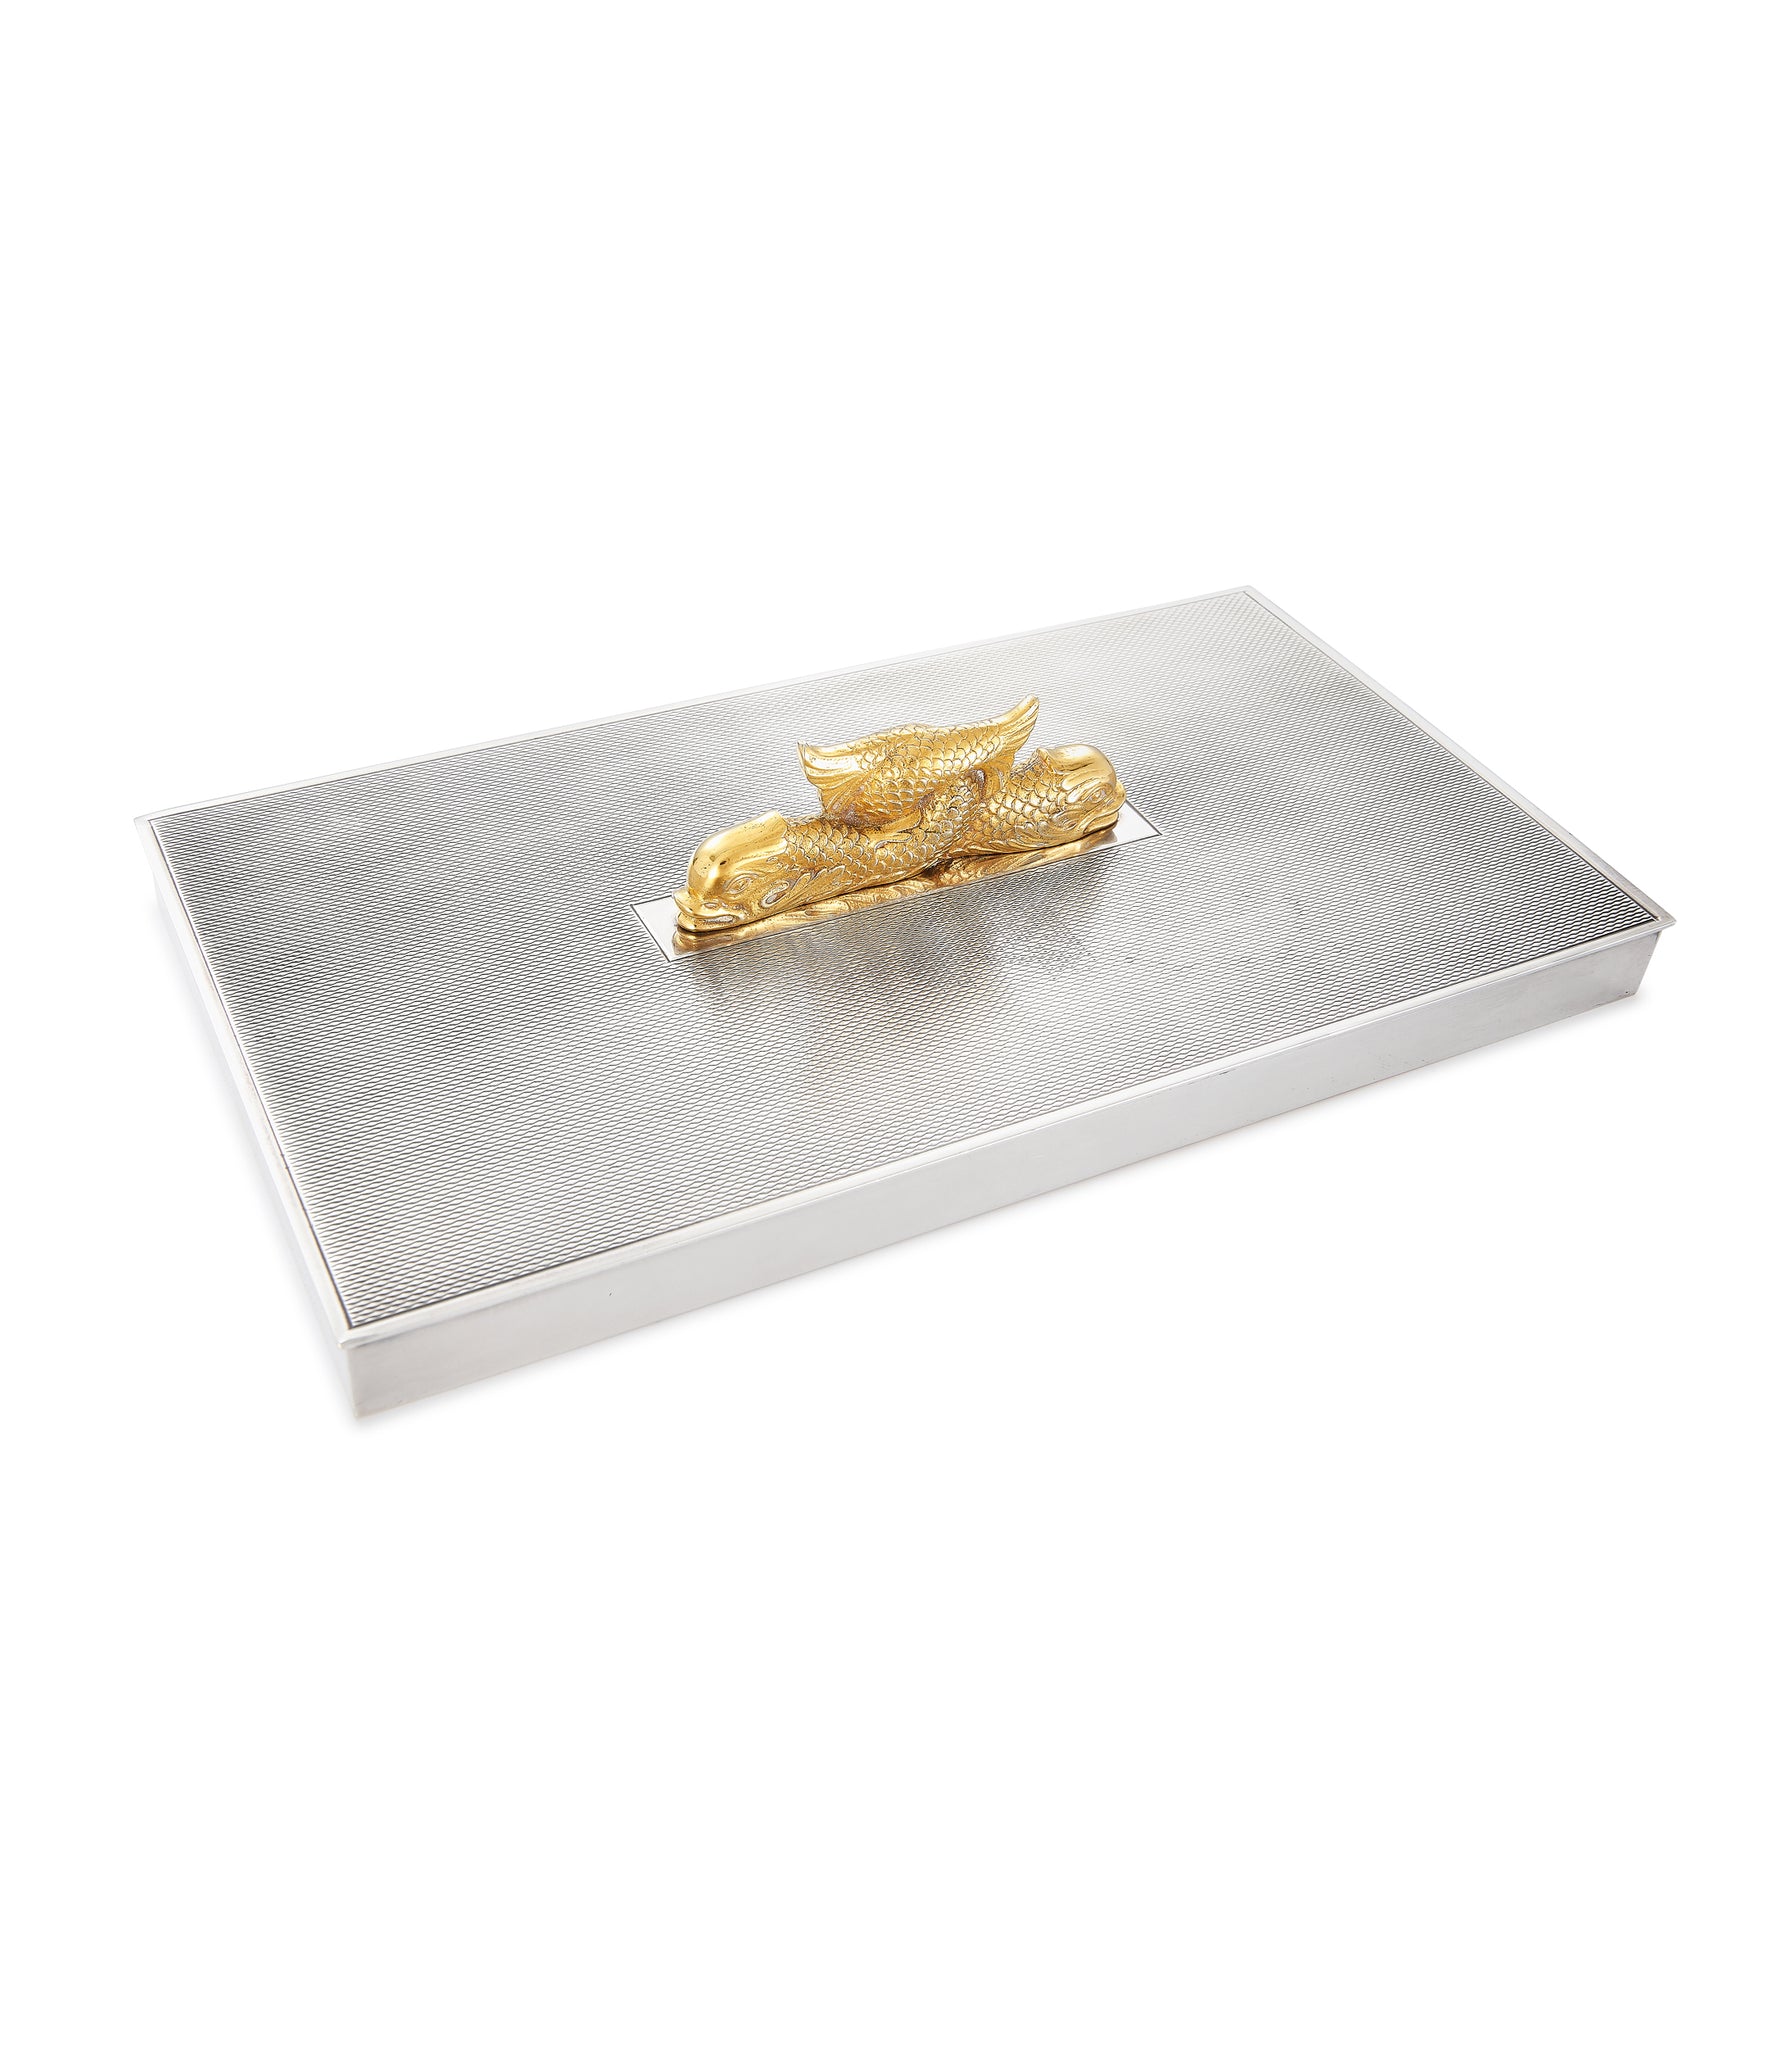 Hermès Cigarette Box | Nautical Design with Dolphins | Silver-gilt Plated A Collected Man London